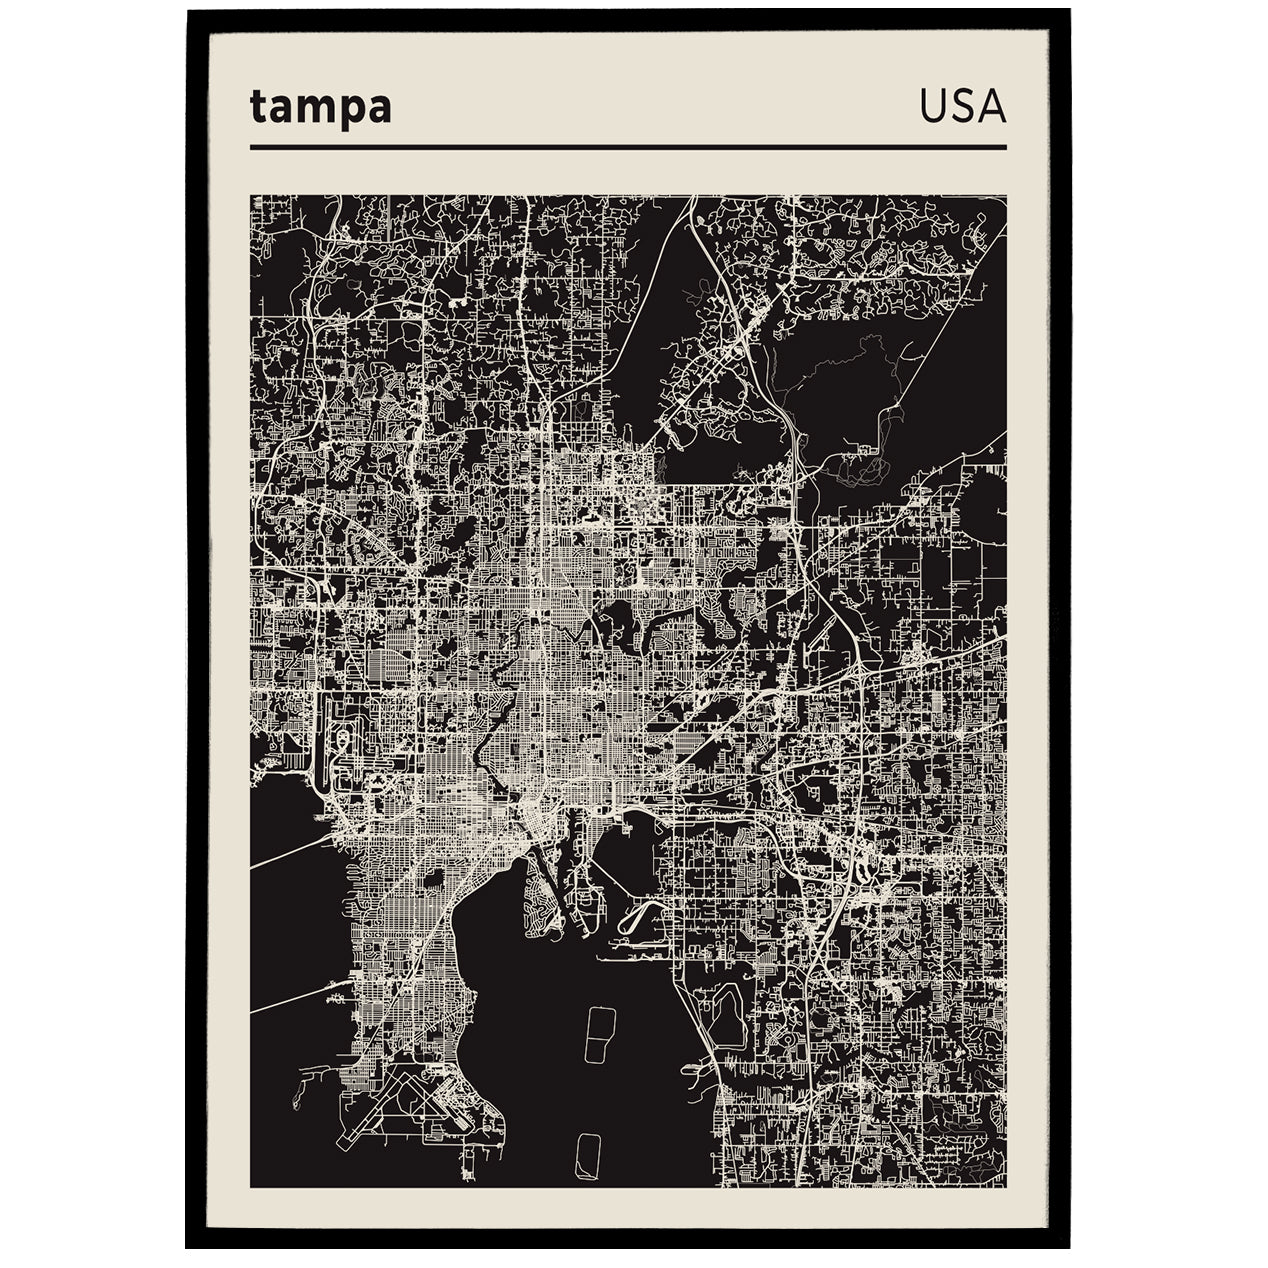 Tampa - USA | City Map Poster - Black and White